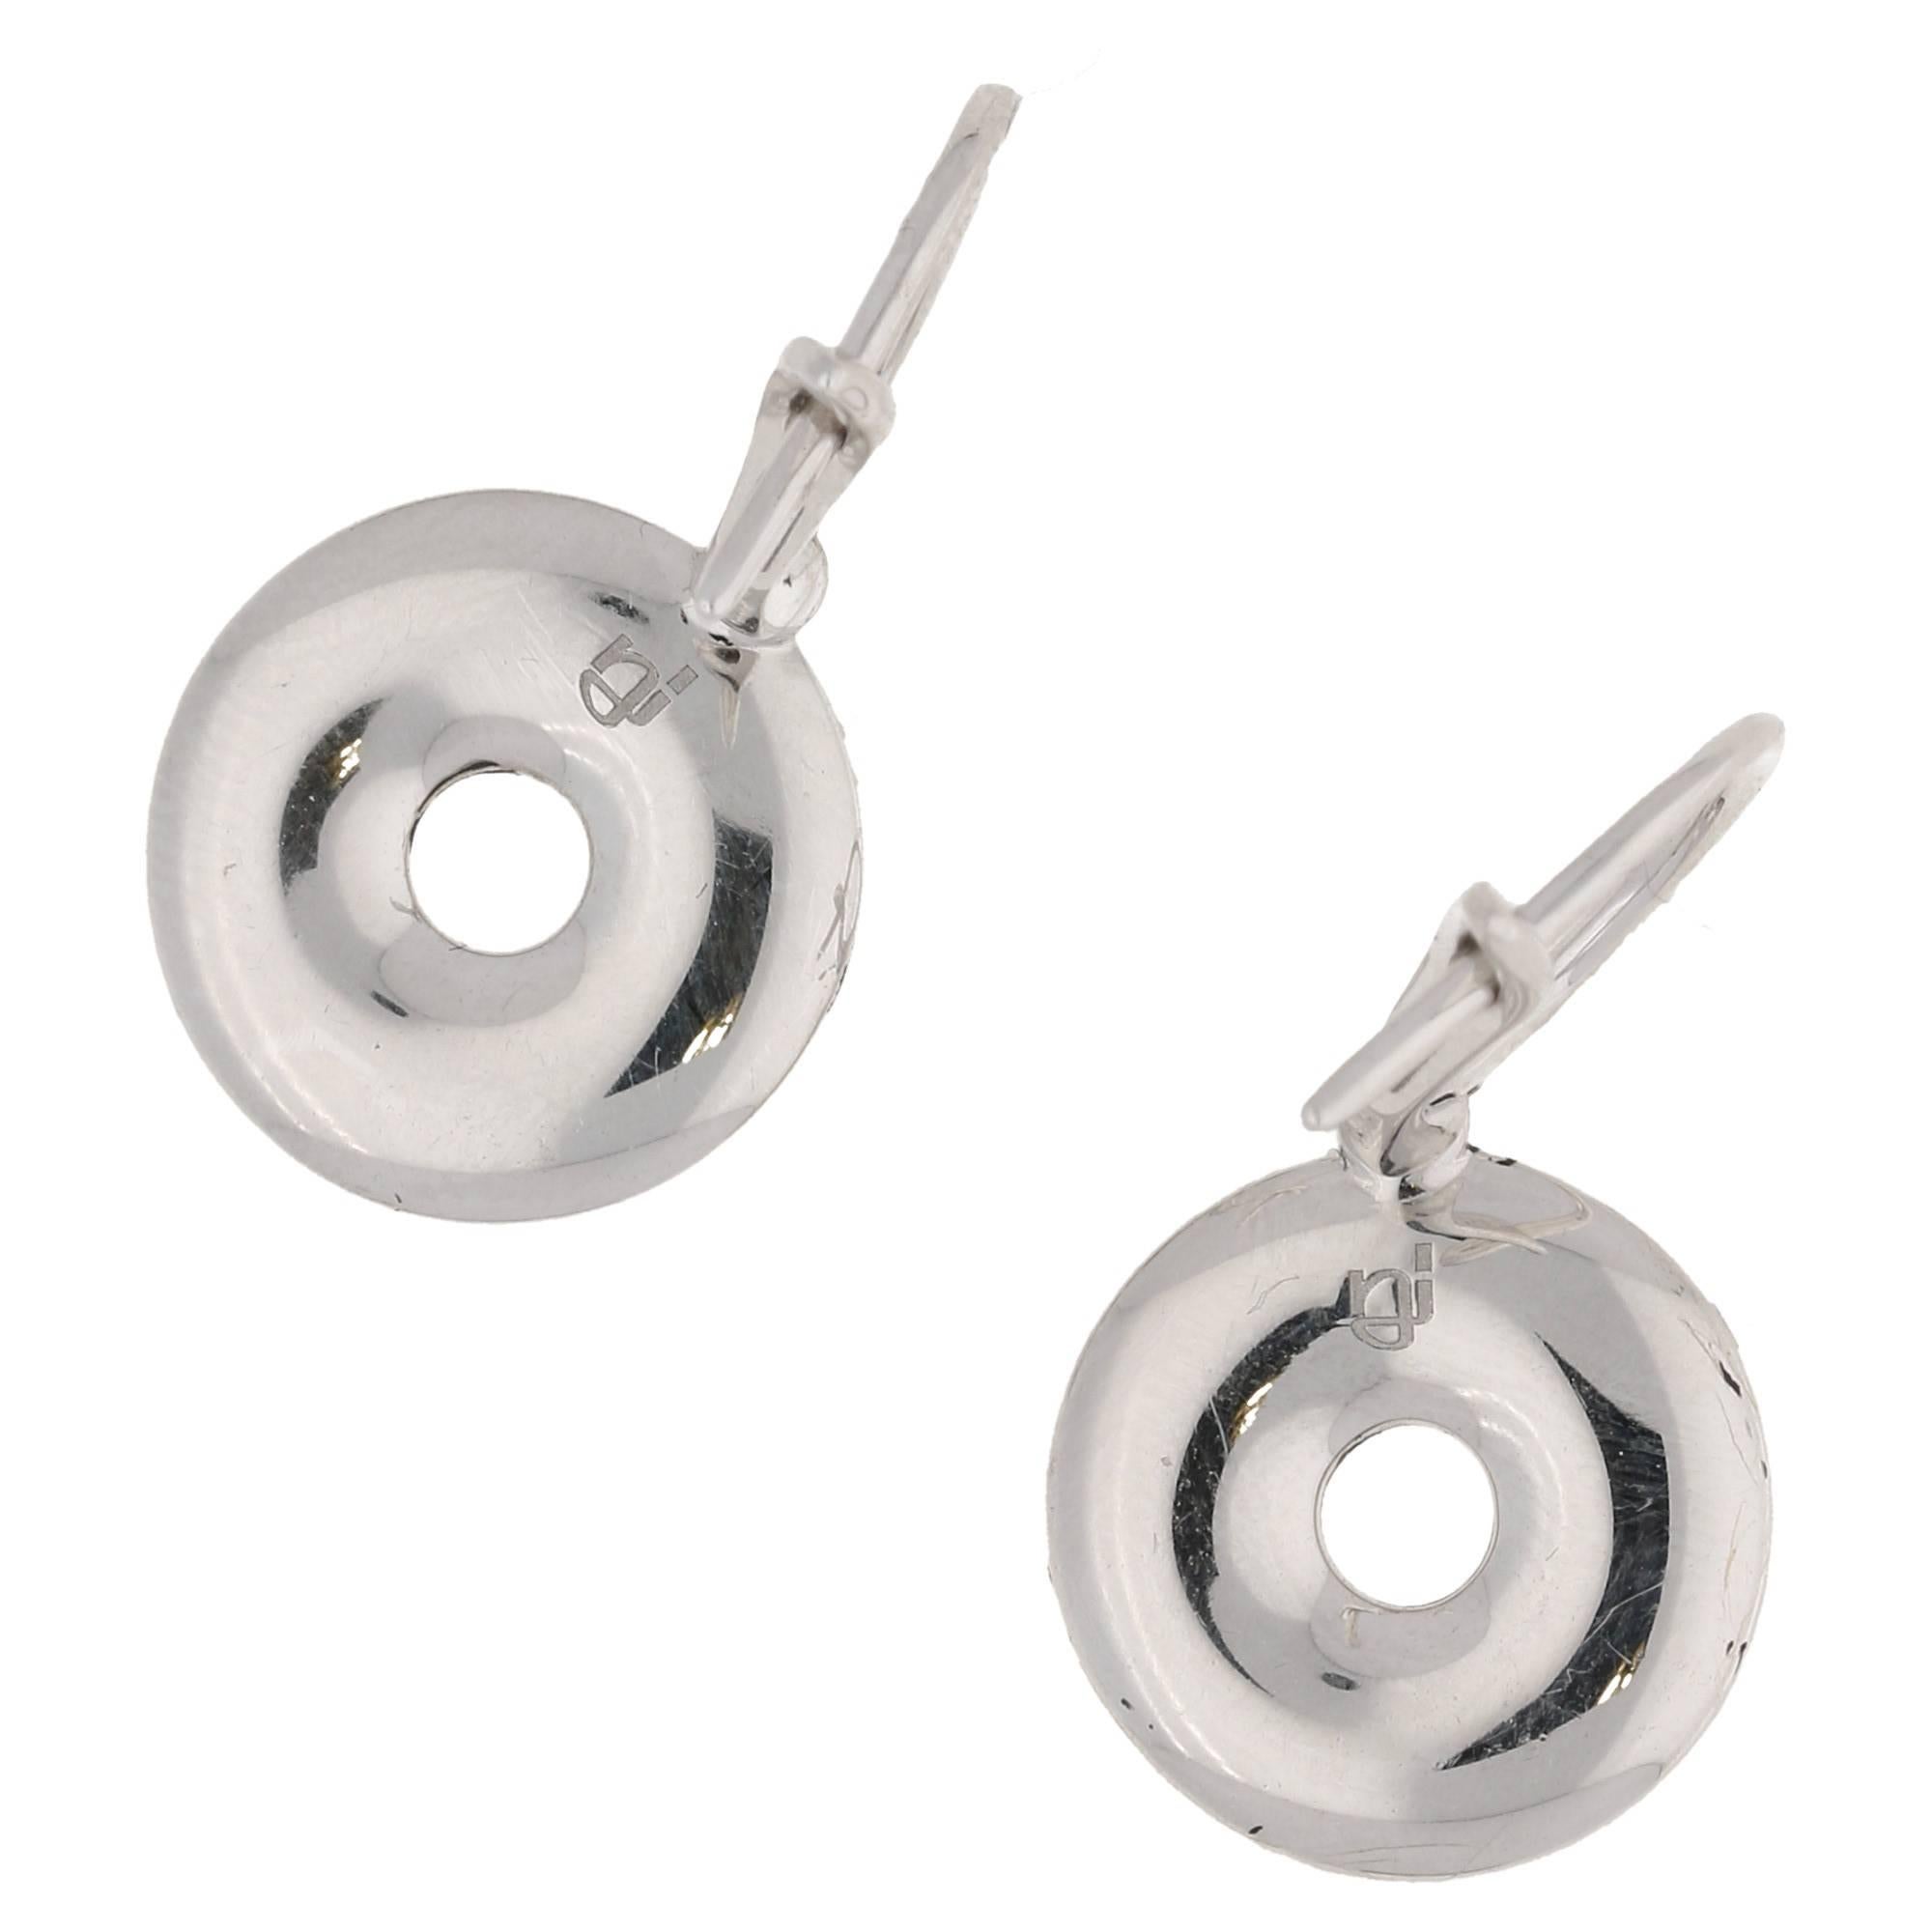 A modern pair of 18ct white gold diamond disc shaped drop earrings featuring a black enamel border and pave set round brilliant cut diamonds to a French continental fitting. Total diamond carat weight estimated as 1.25ct, G/H colour and Vs